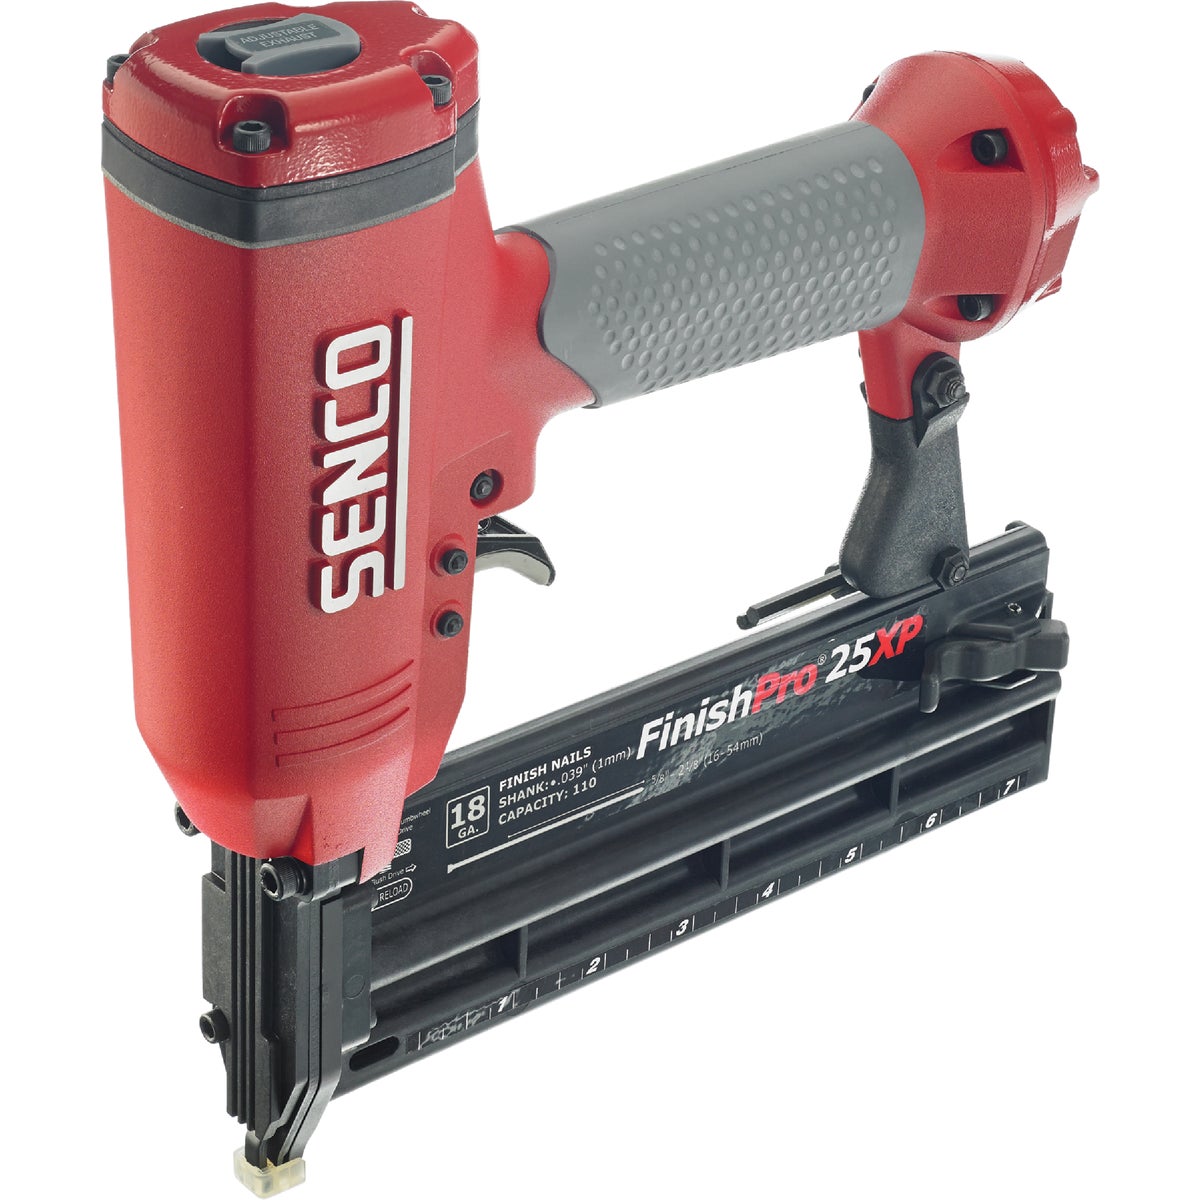 Item 359955, The SENCO FinishPro 25XP has redefined the brad nailer category! Driving 